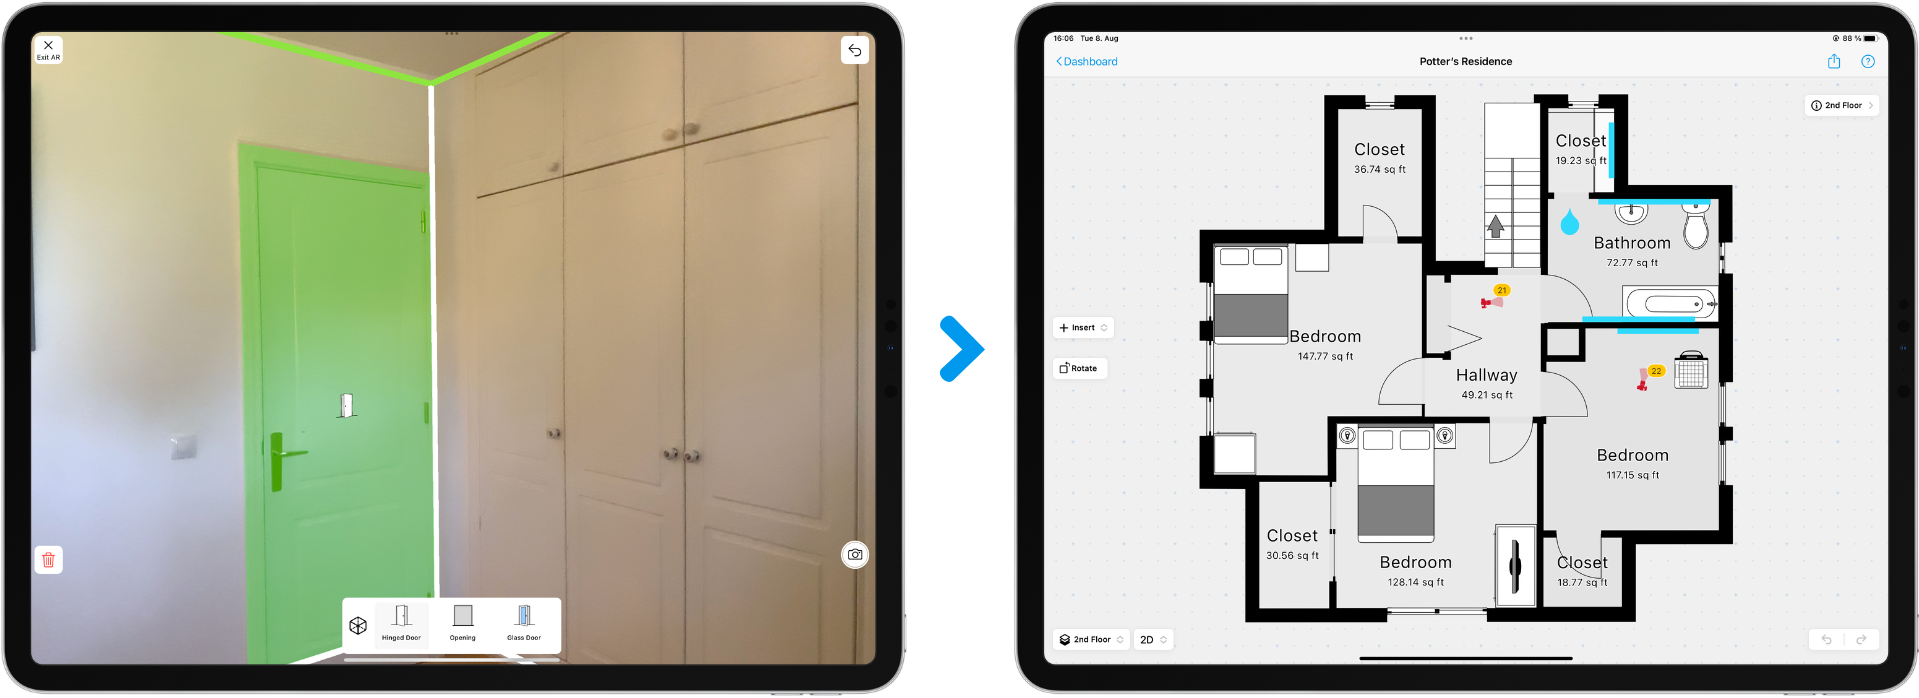 Using computer vision on an Ipad capturing a room from a claim inspection with AI magicplan AR scanning feature and a second ipad with the final result of the floor plan from the claim